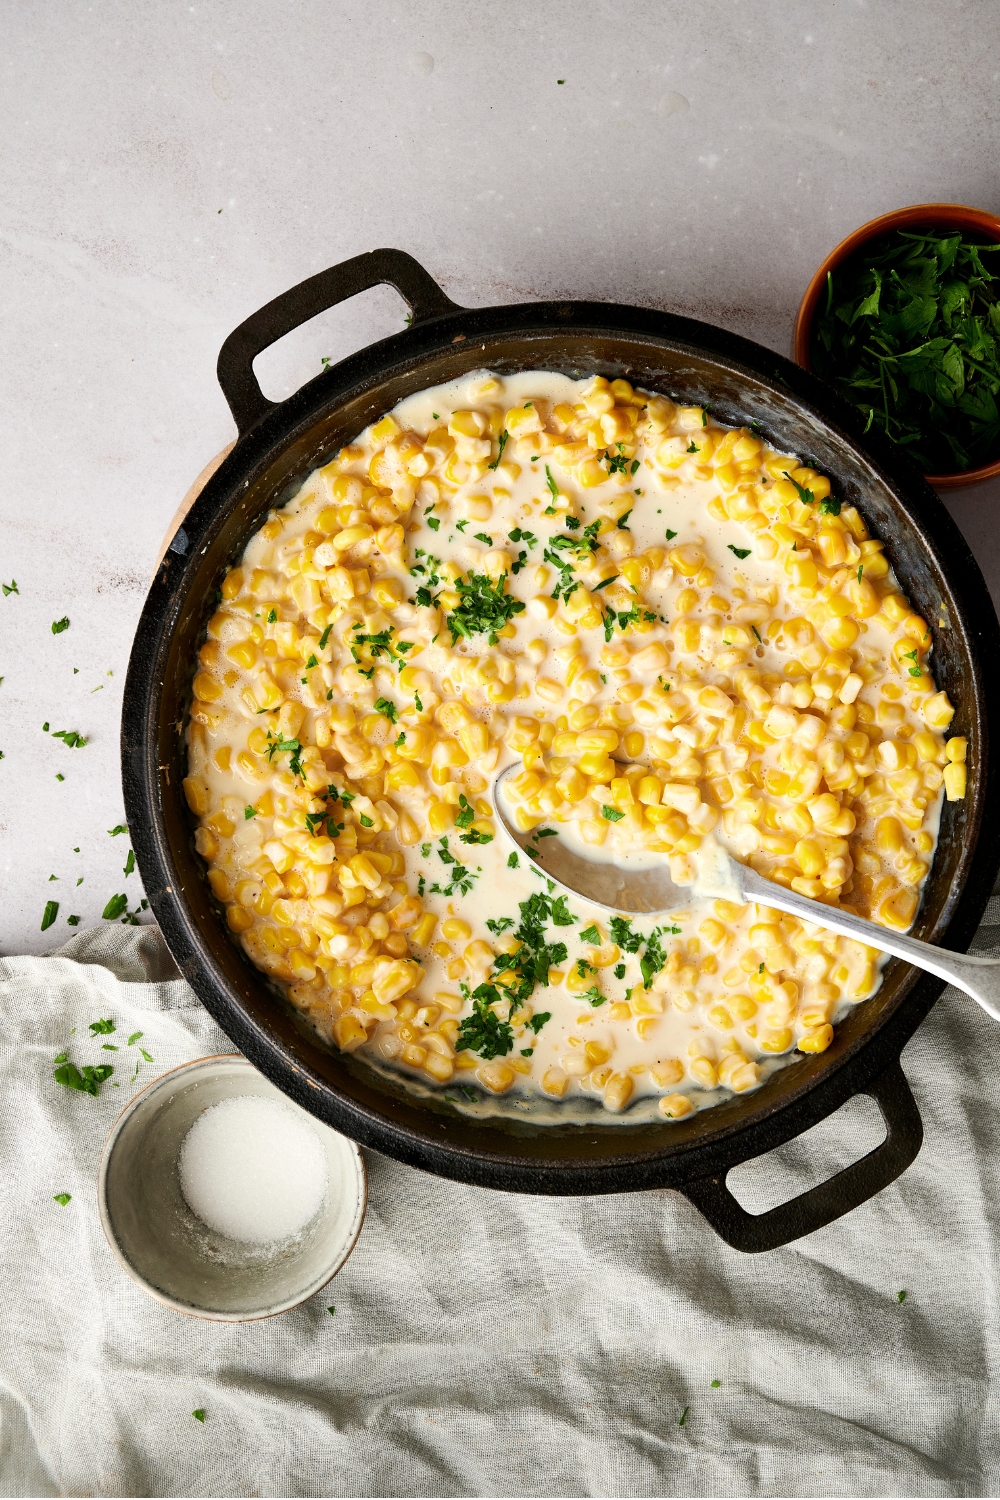 A large black pot full of creamed corn and fresh herbs with a spoon on a gray counter.